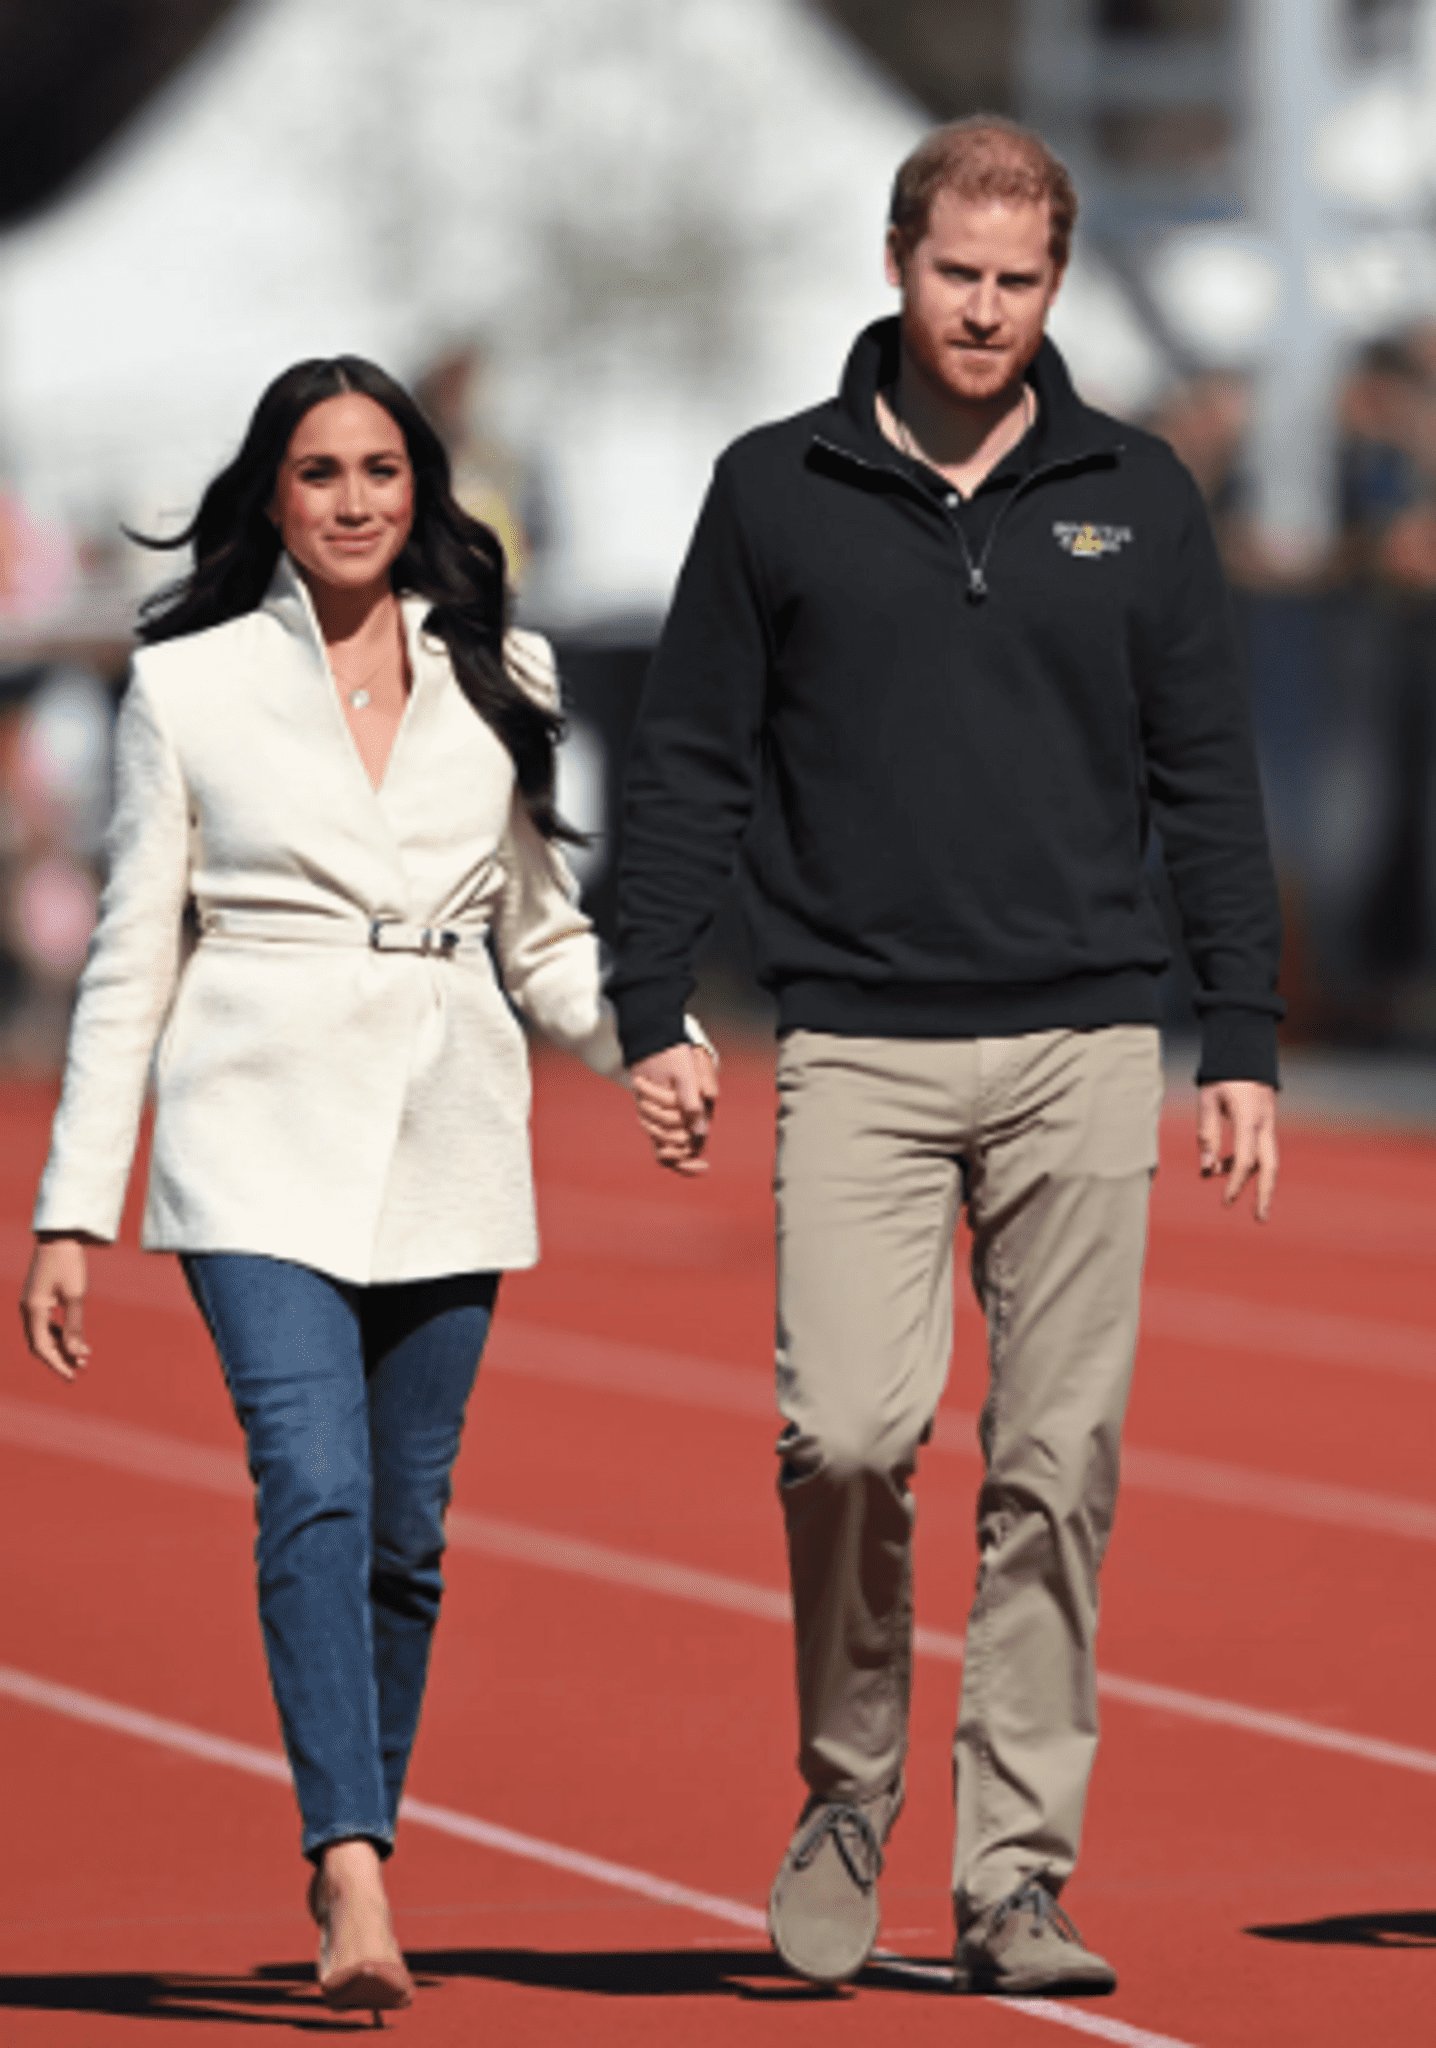 prince-harry-and-meghan-markle-came-to-the-uk-on-the-eve-of-the-monarchs-platinum-jubilee